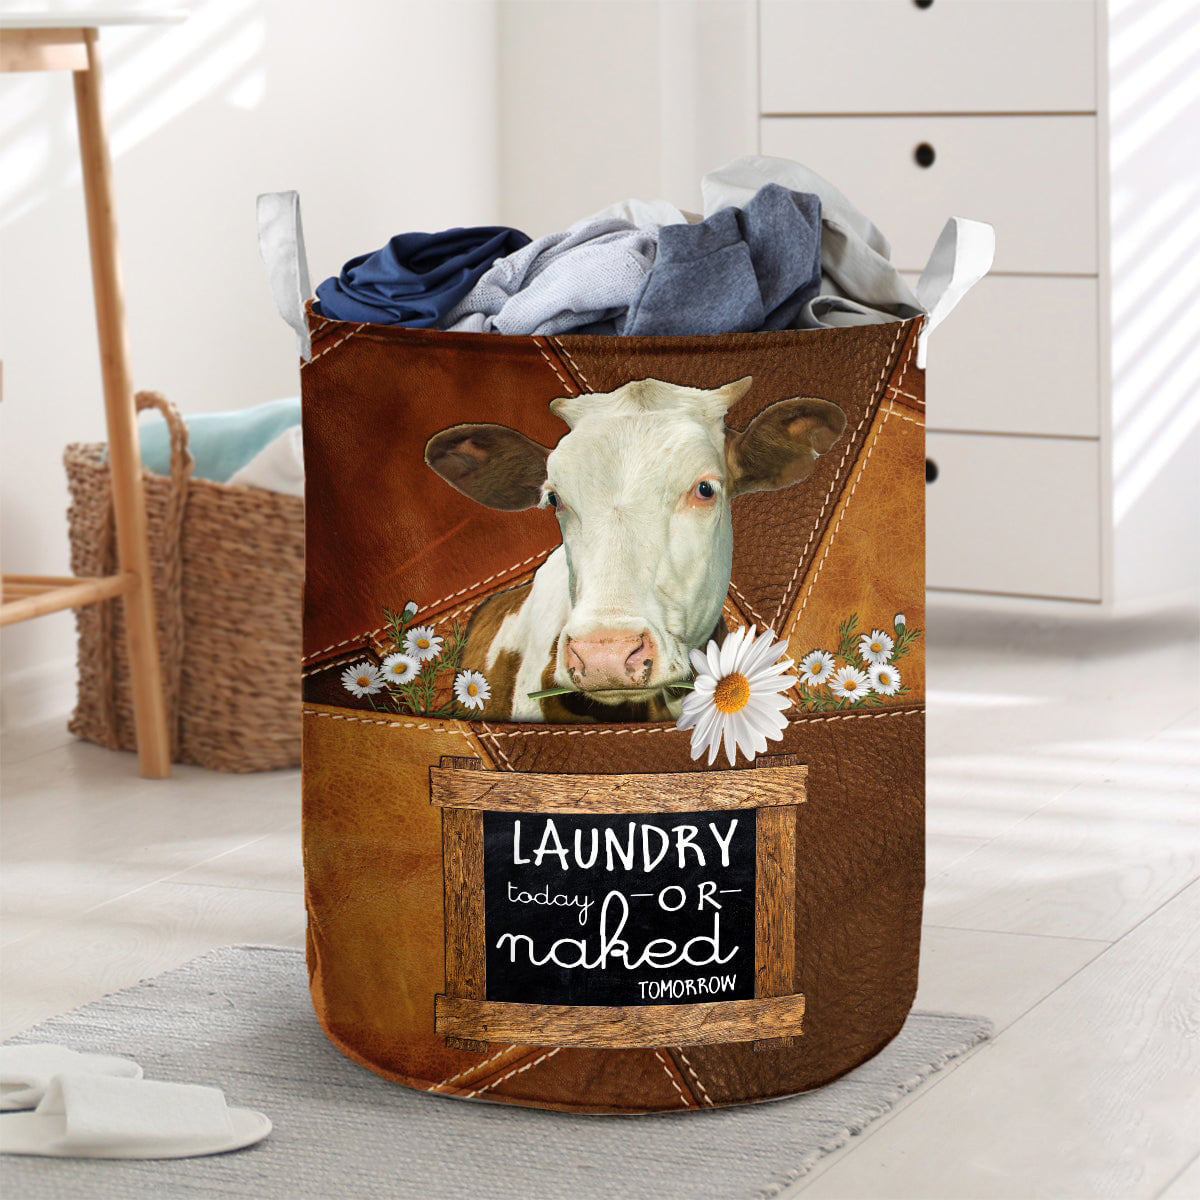 Brown Swiss-laundry today or naked tomorrow laundry basket